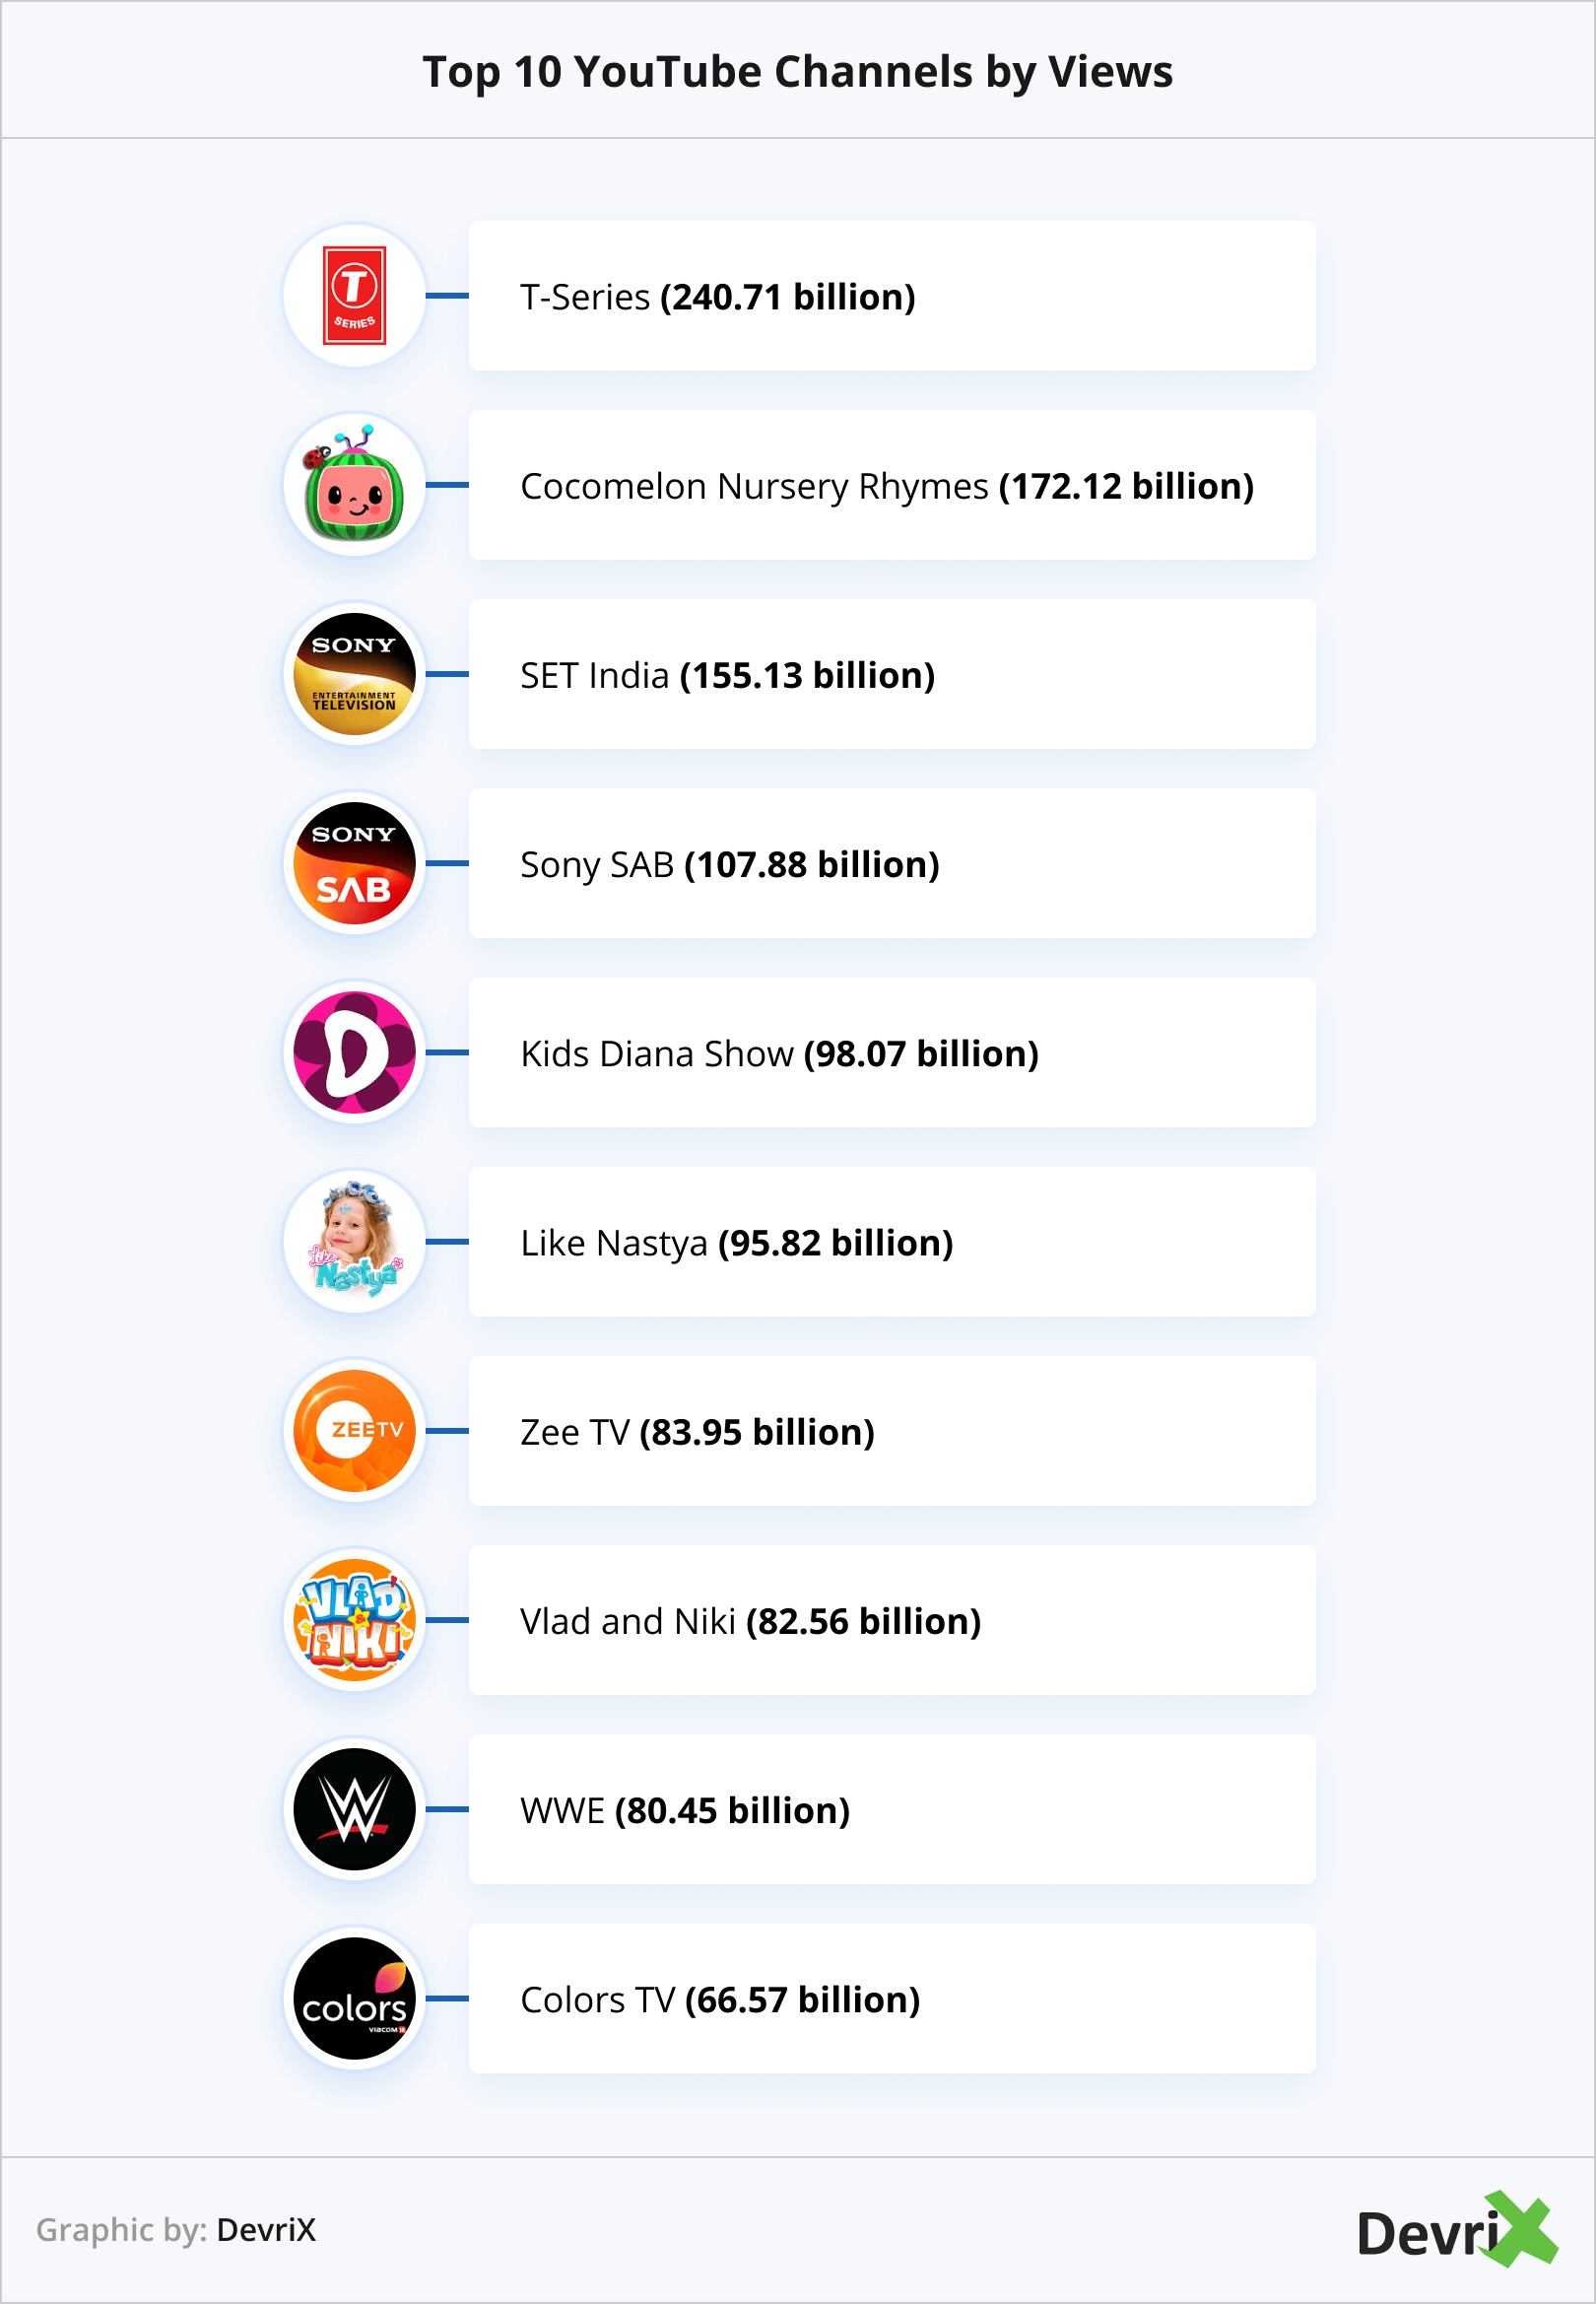 Top 10 YouTube Channels by Views